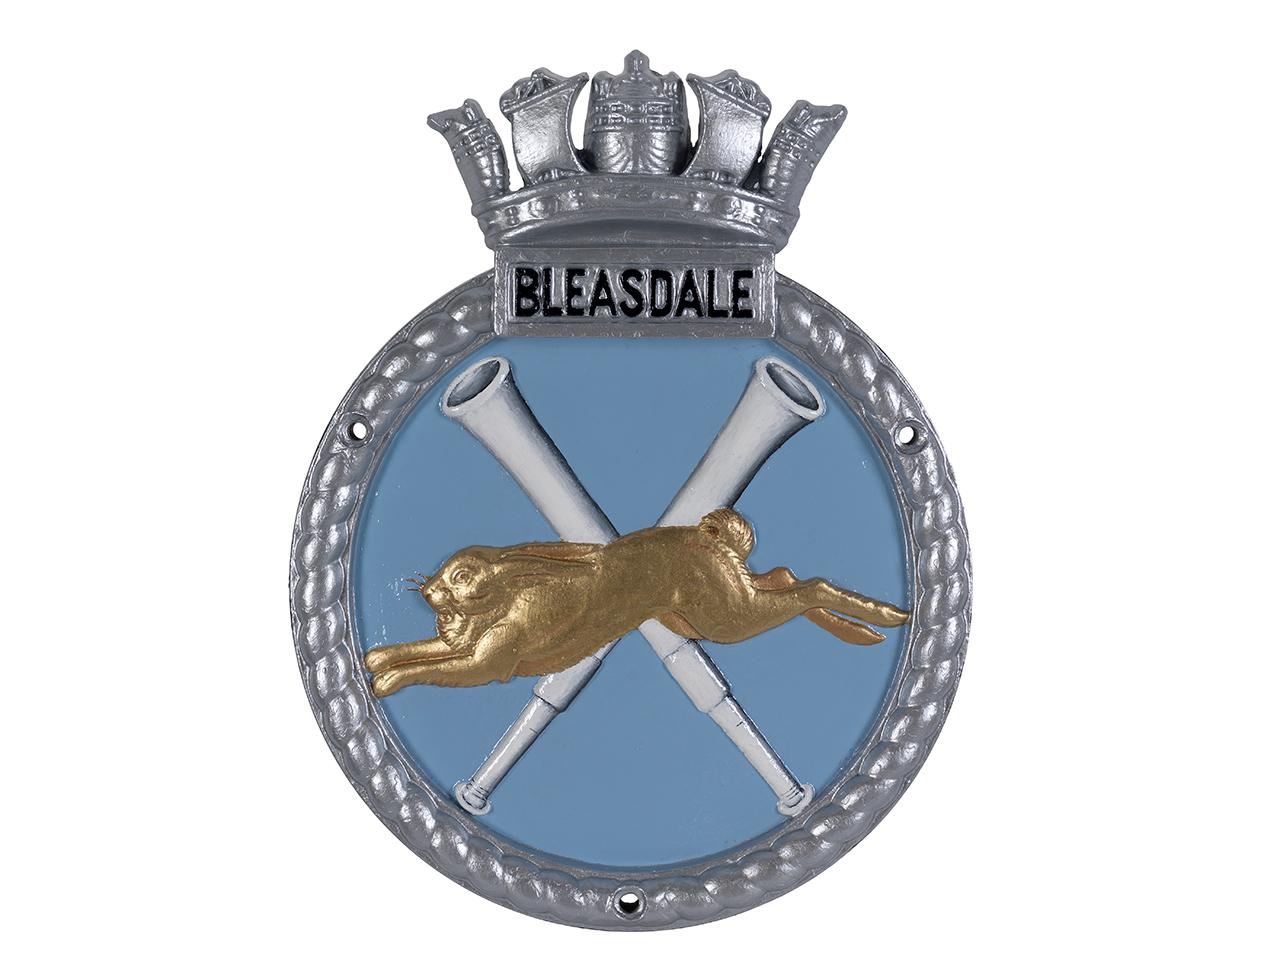 a ship's badge with a golden hare and 2 telescopes in the background